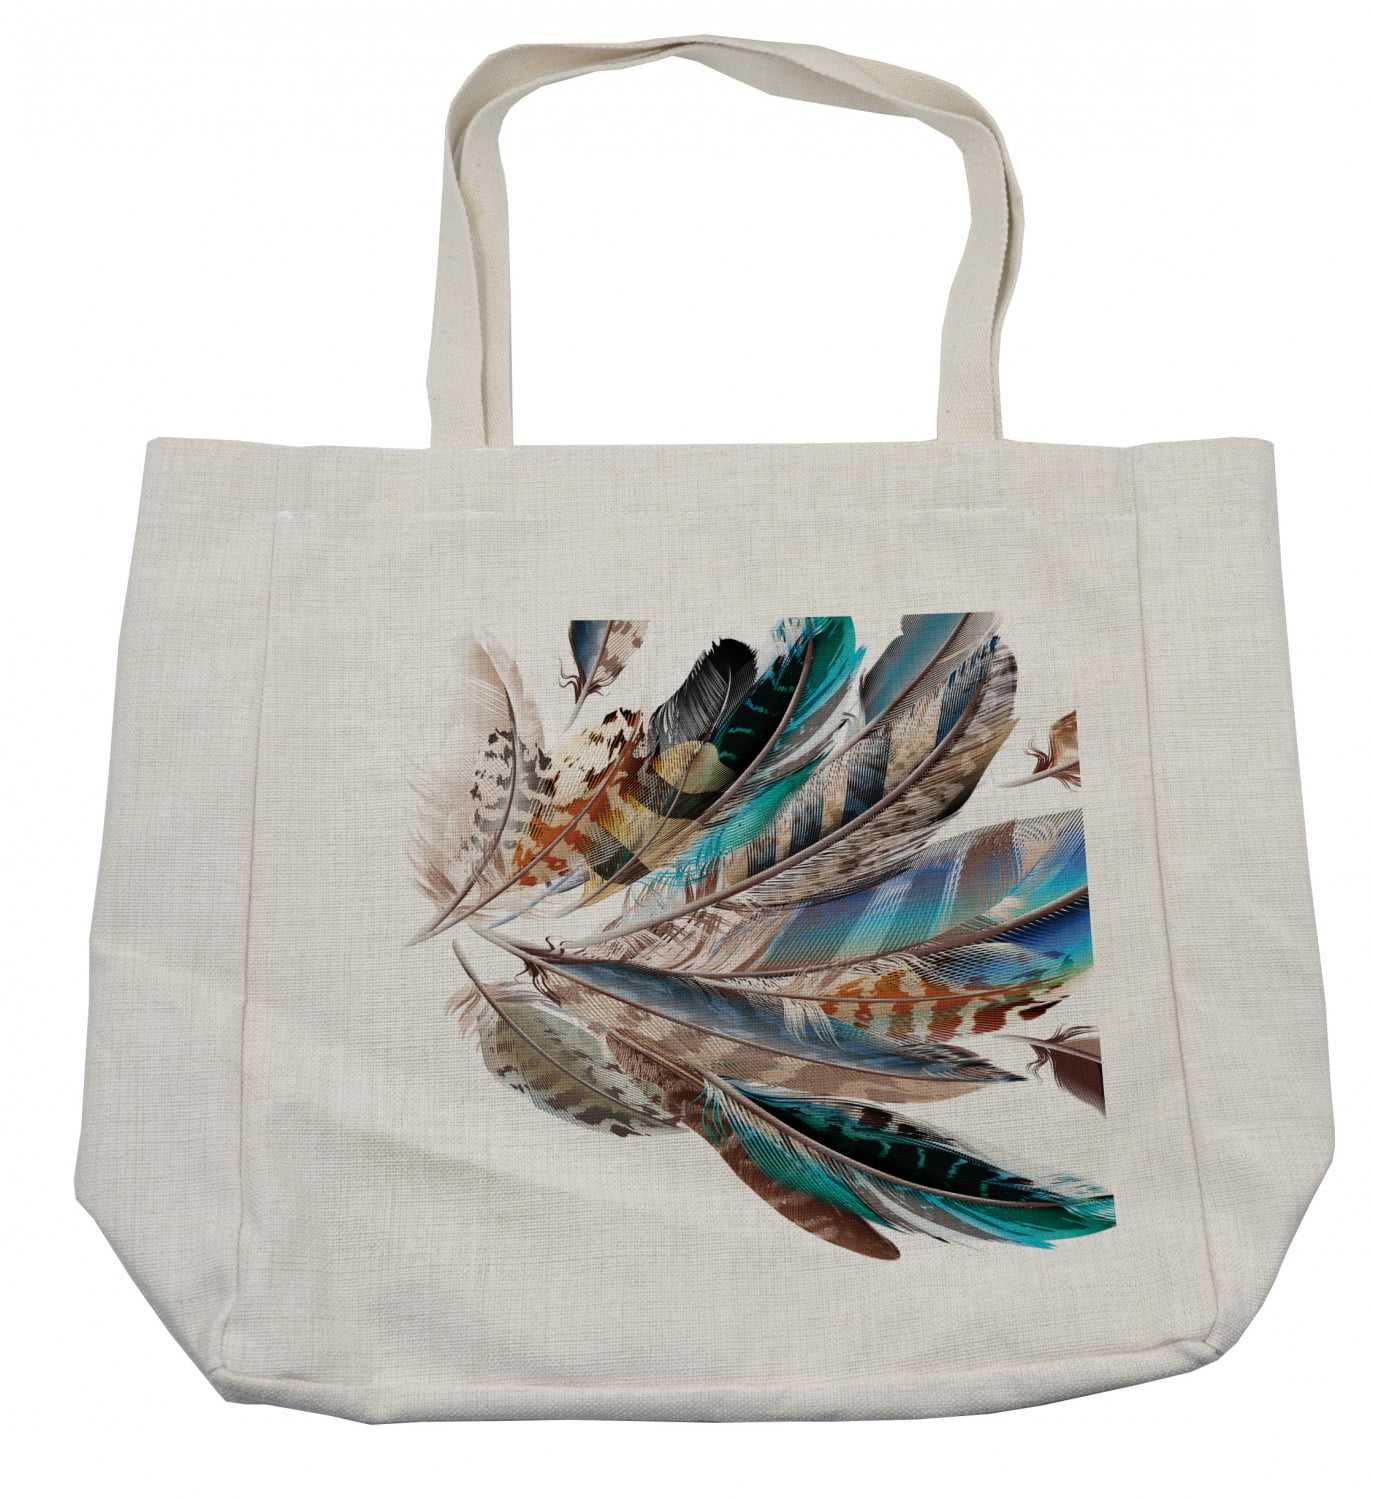 Feathers Shopping Bag, Vaned Types and Natal Contour Flight Bird Feathers  and Animal Skin Element Print, Eco-Friendly Reusable Bag for Groceries  Beach and More, 